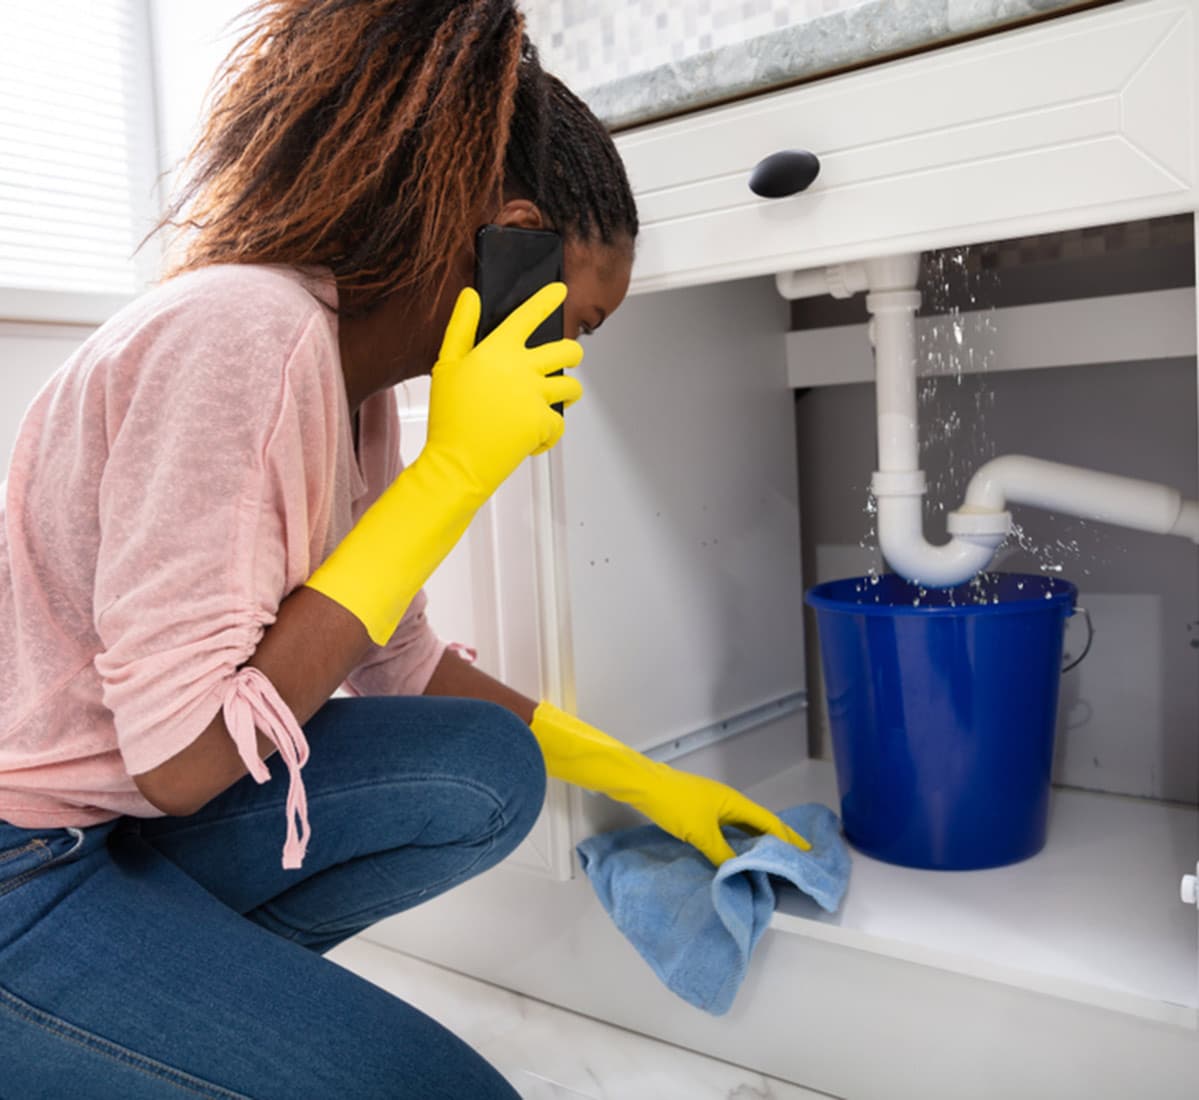 A Young Woman Placing Blue Bucket Under Leaking Sink Pipe in Bathurst, NSW